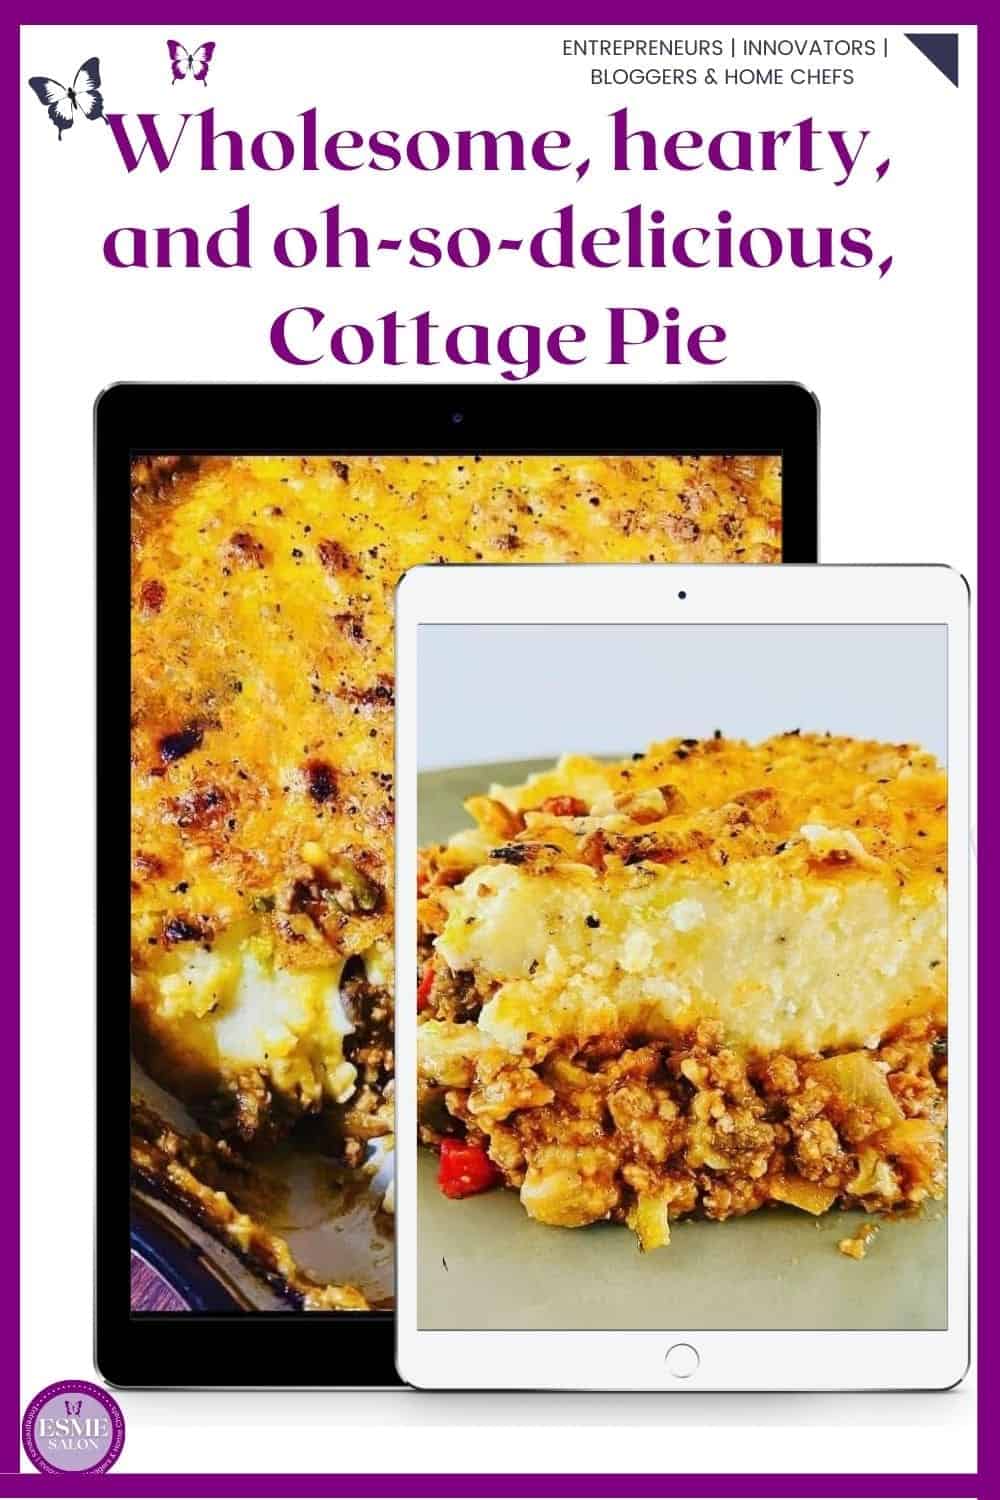 an image of a plate filled with Cottage Pie